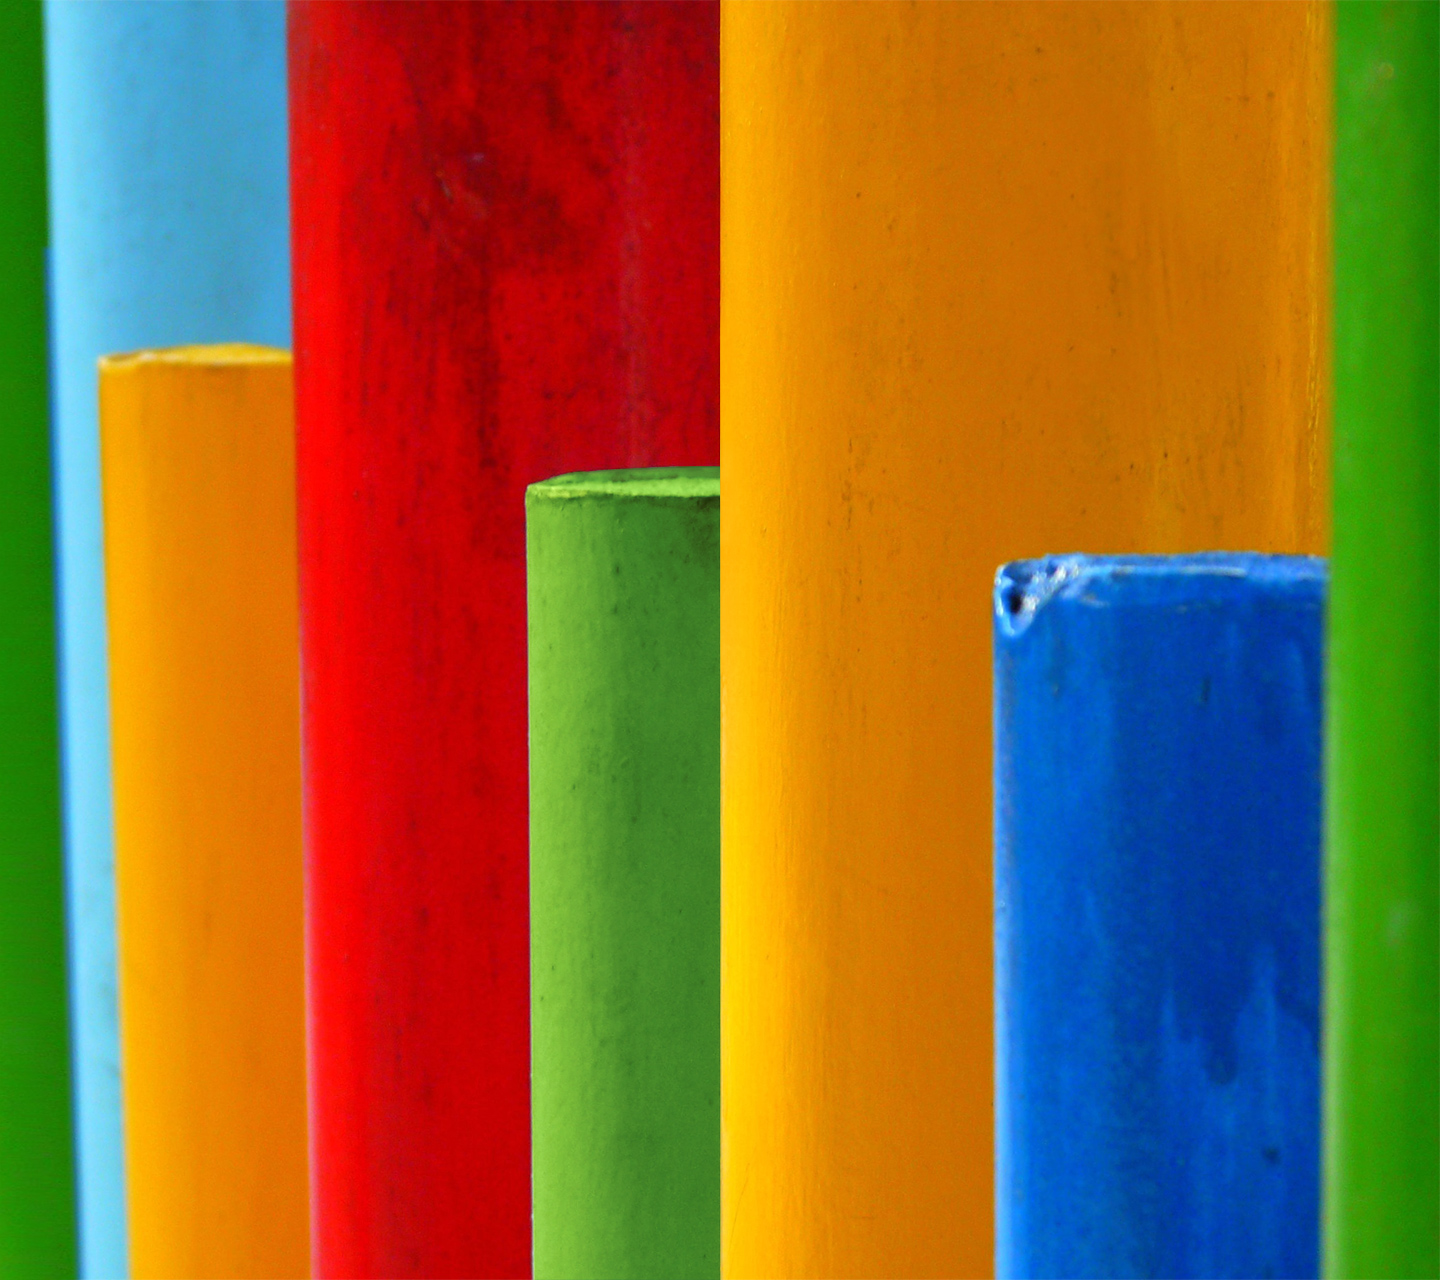 wallpaper for moto g4 plus,blue,green,yellow,colorfulness,cylinder